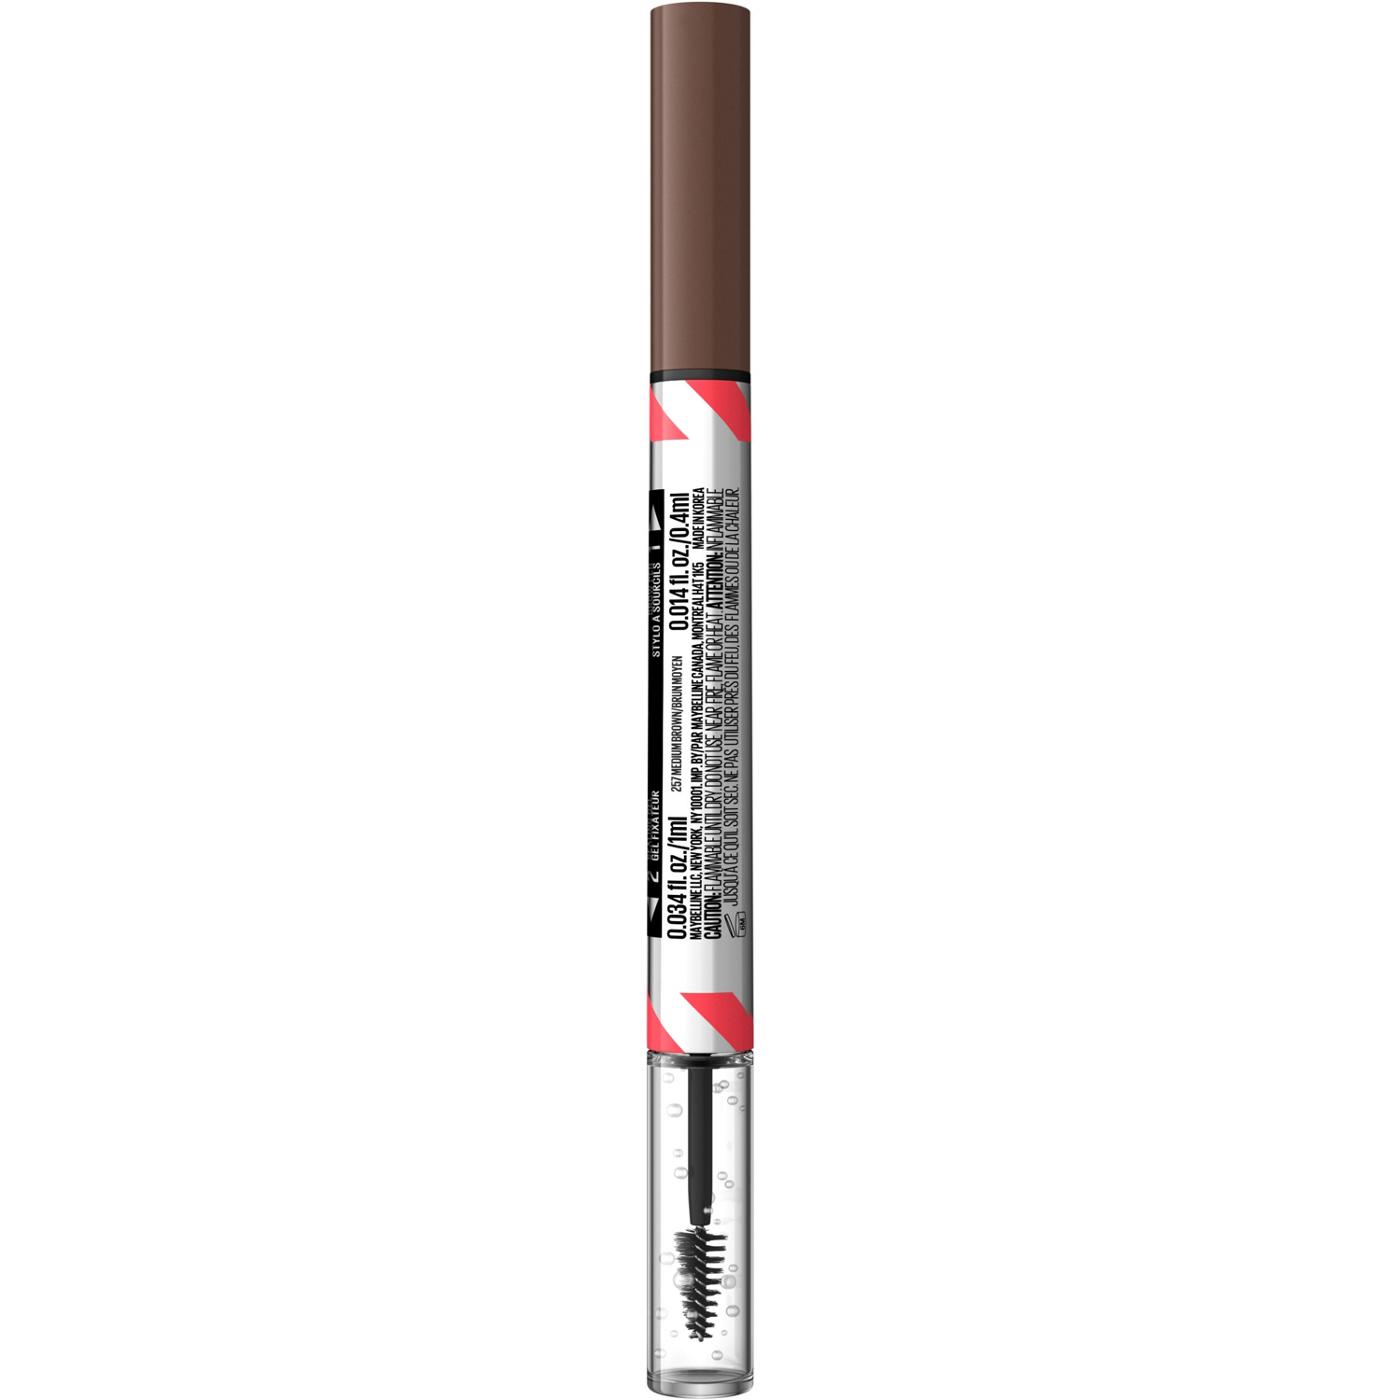 Maybelline Build A Brow 2 In 1 Brow Pen - Medium Brown; image 9 of 16